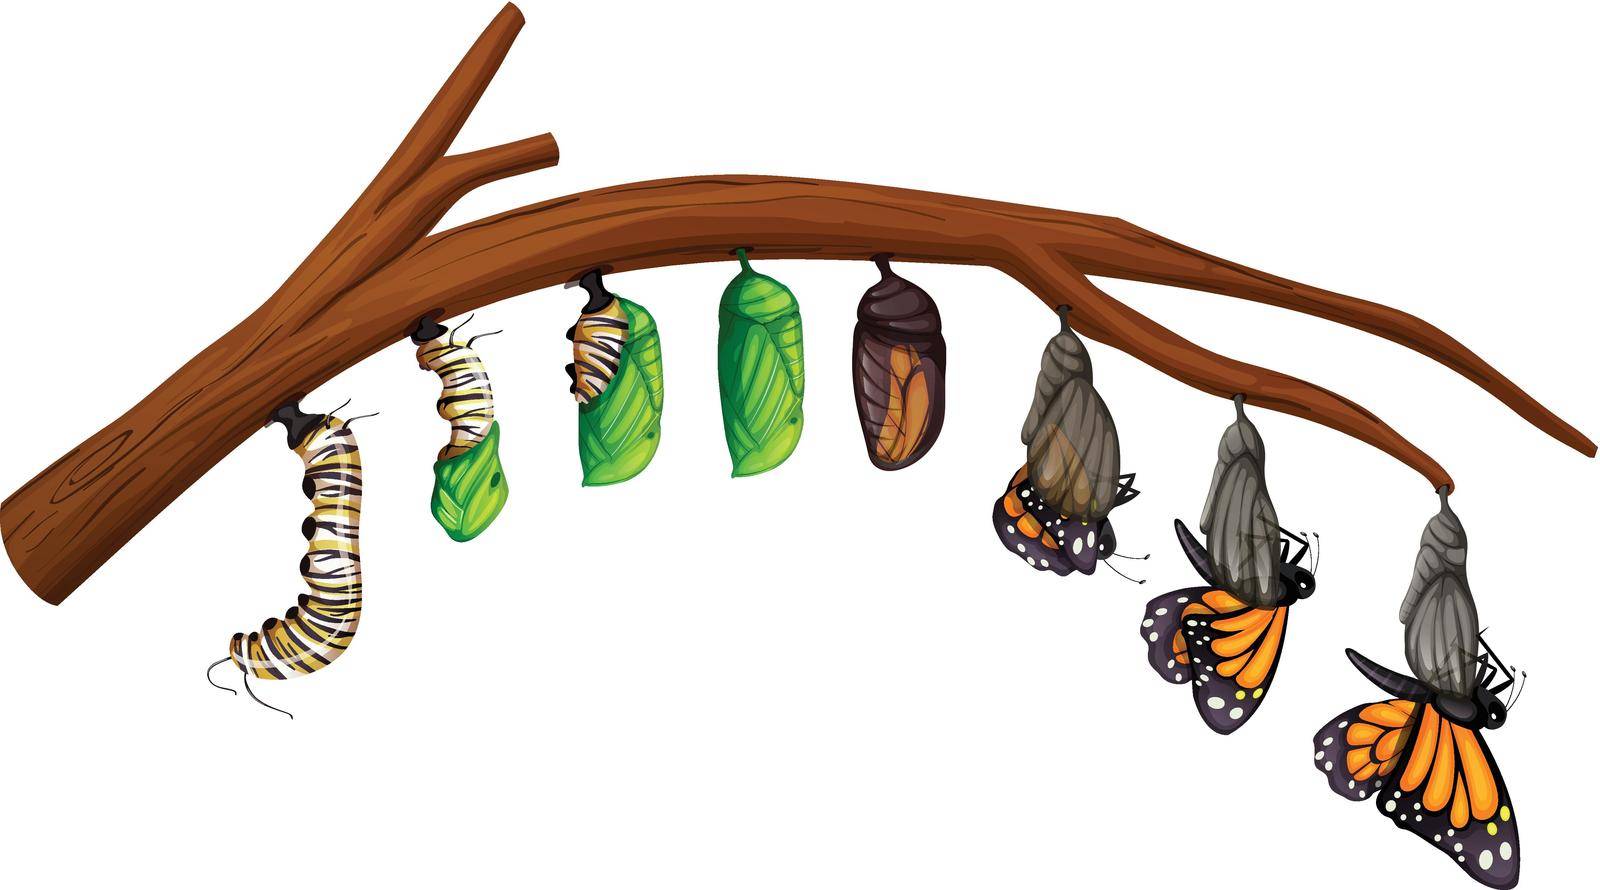 A Set of Butterfly Life Cycle by iimages